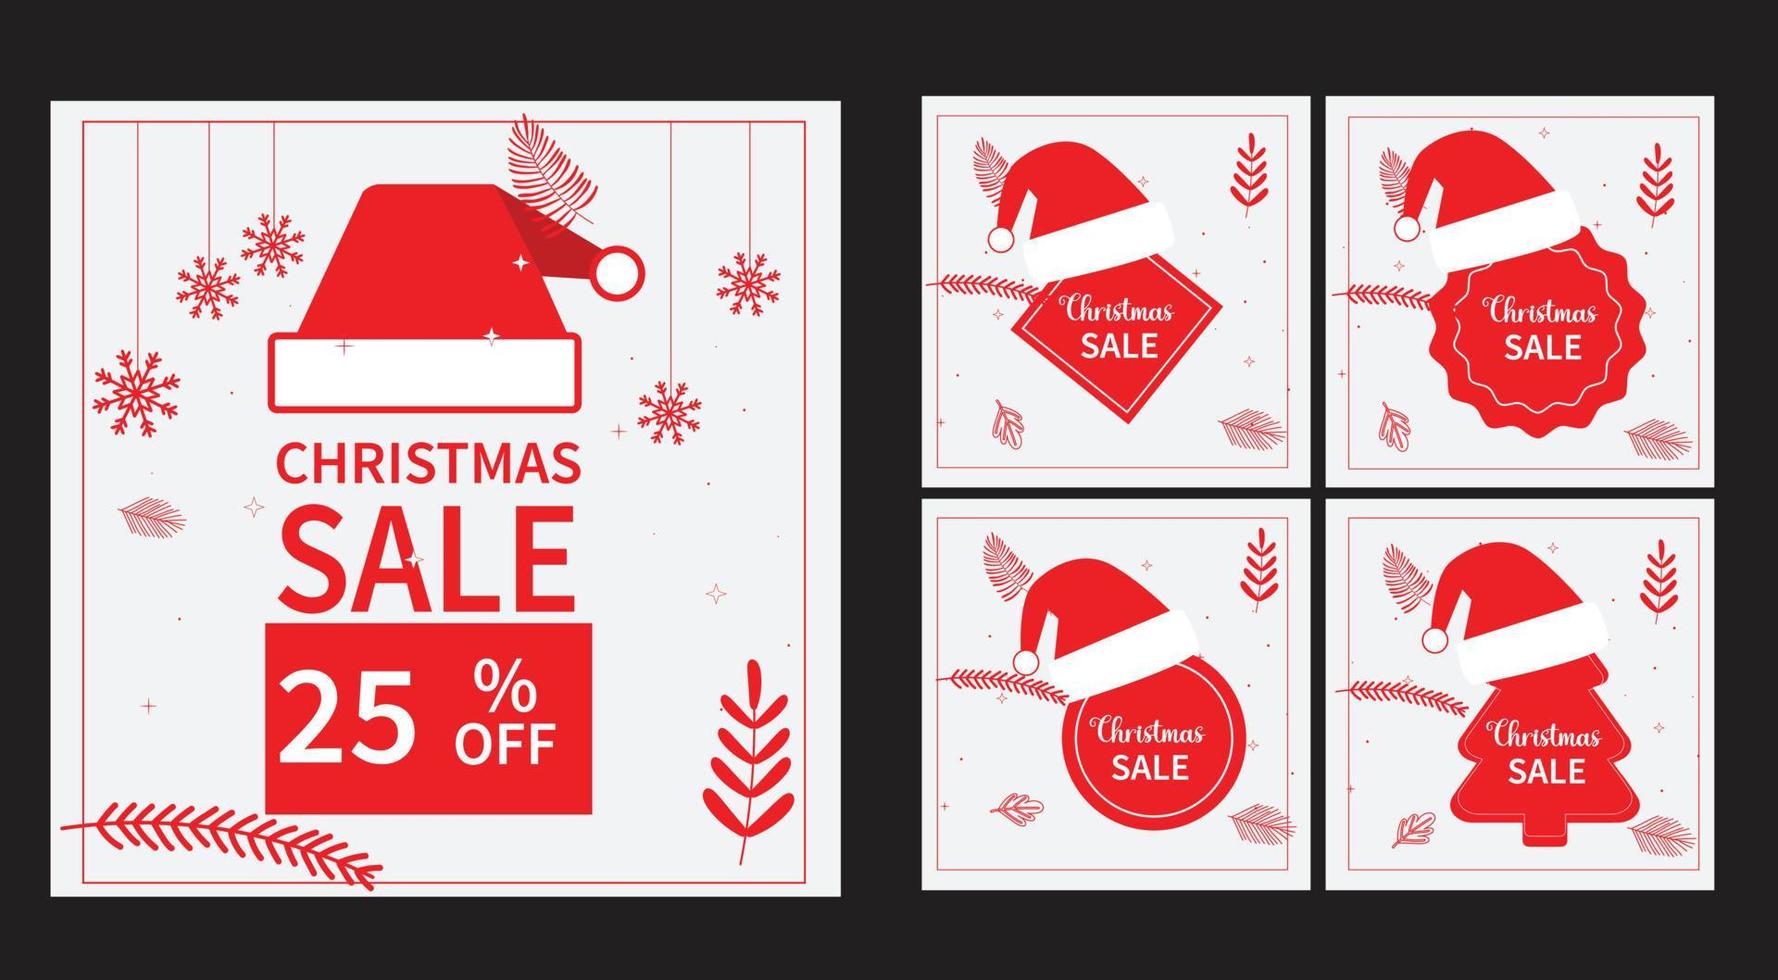 Christmas day sale template design vector